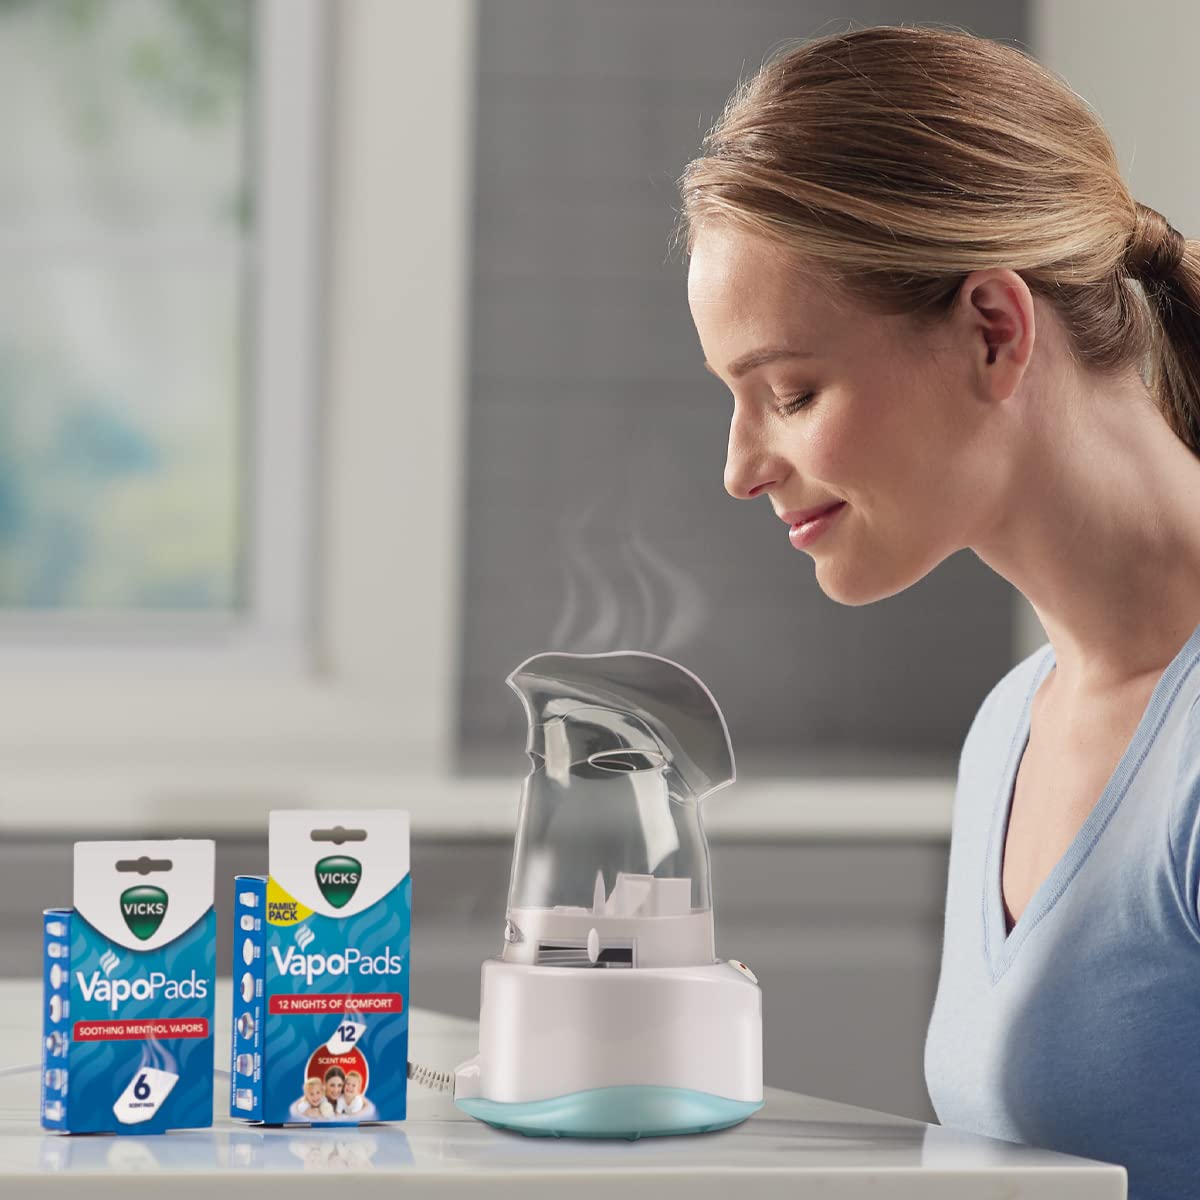 V1200 Vicks Personal Steam Inhaler with Soft Face Mask for Targeted Steam Relief, Aids with Sinus Problems, Congestion, Cough, Use with Soothing Menthol Vicks VapoPads